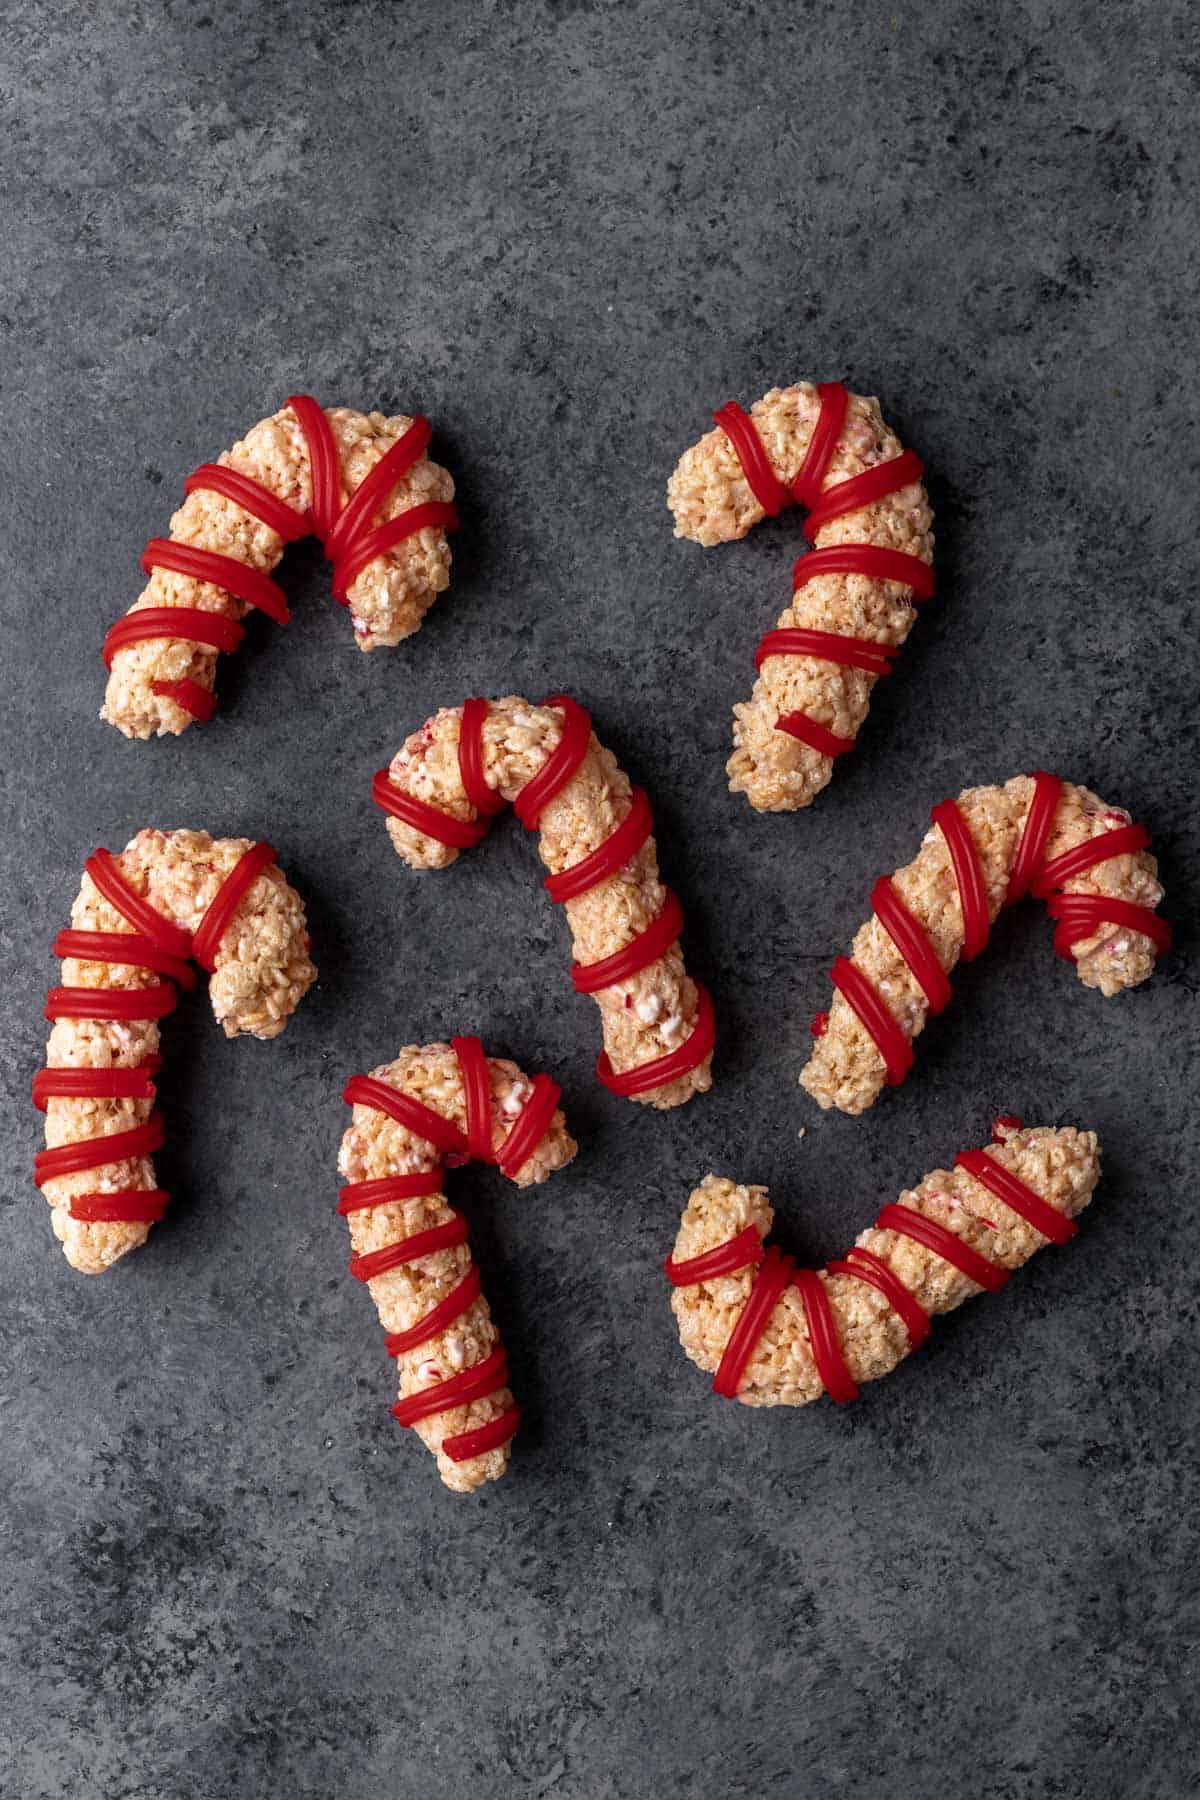 Candy cane shaped rice krispie treats wrapped in red candy strings.